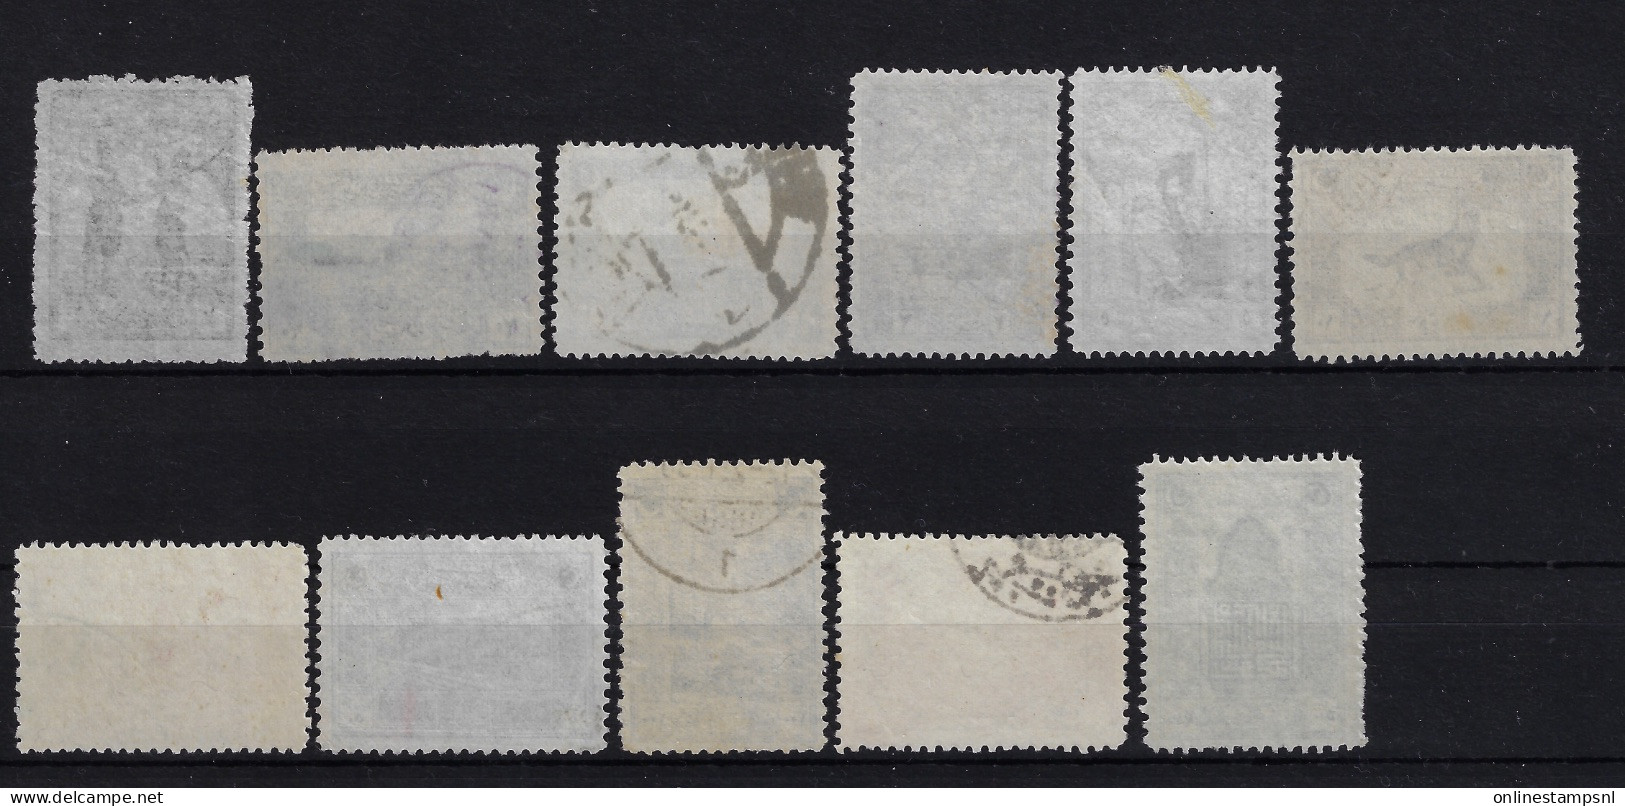 Turkey: Mi 767 - 778  Isf  1079 - 1090 1922 Oblitéré/cancelled/used 1x 50 Piasters - Usados